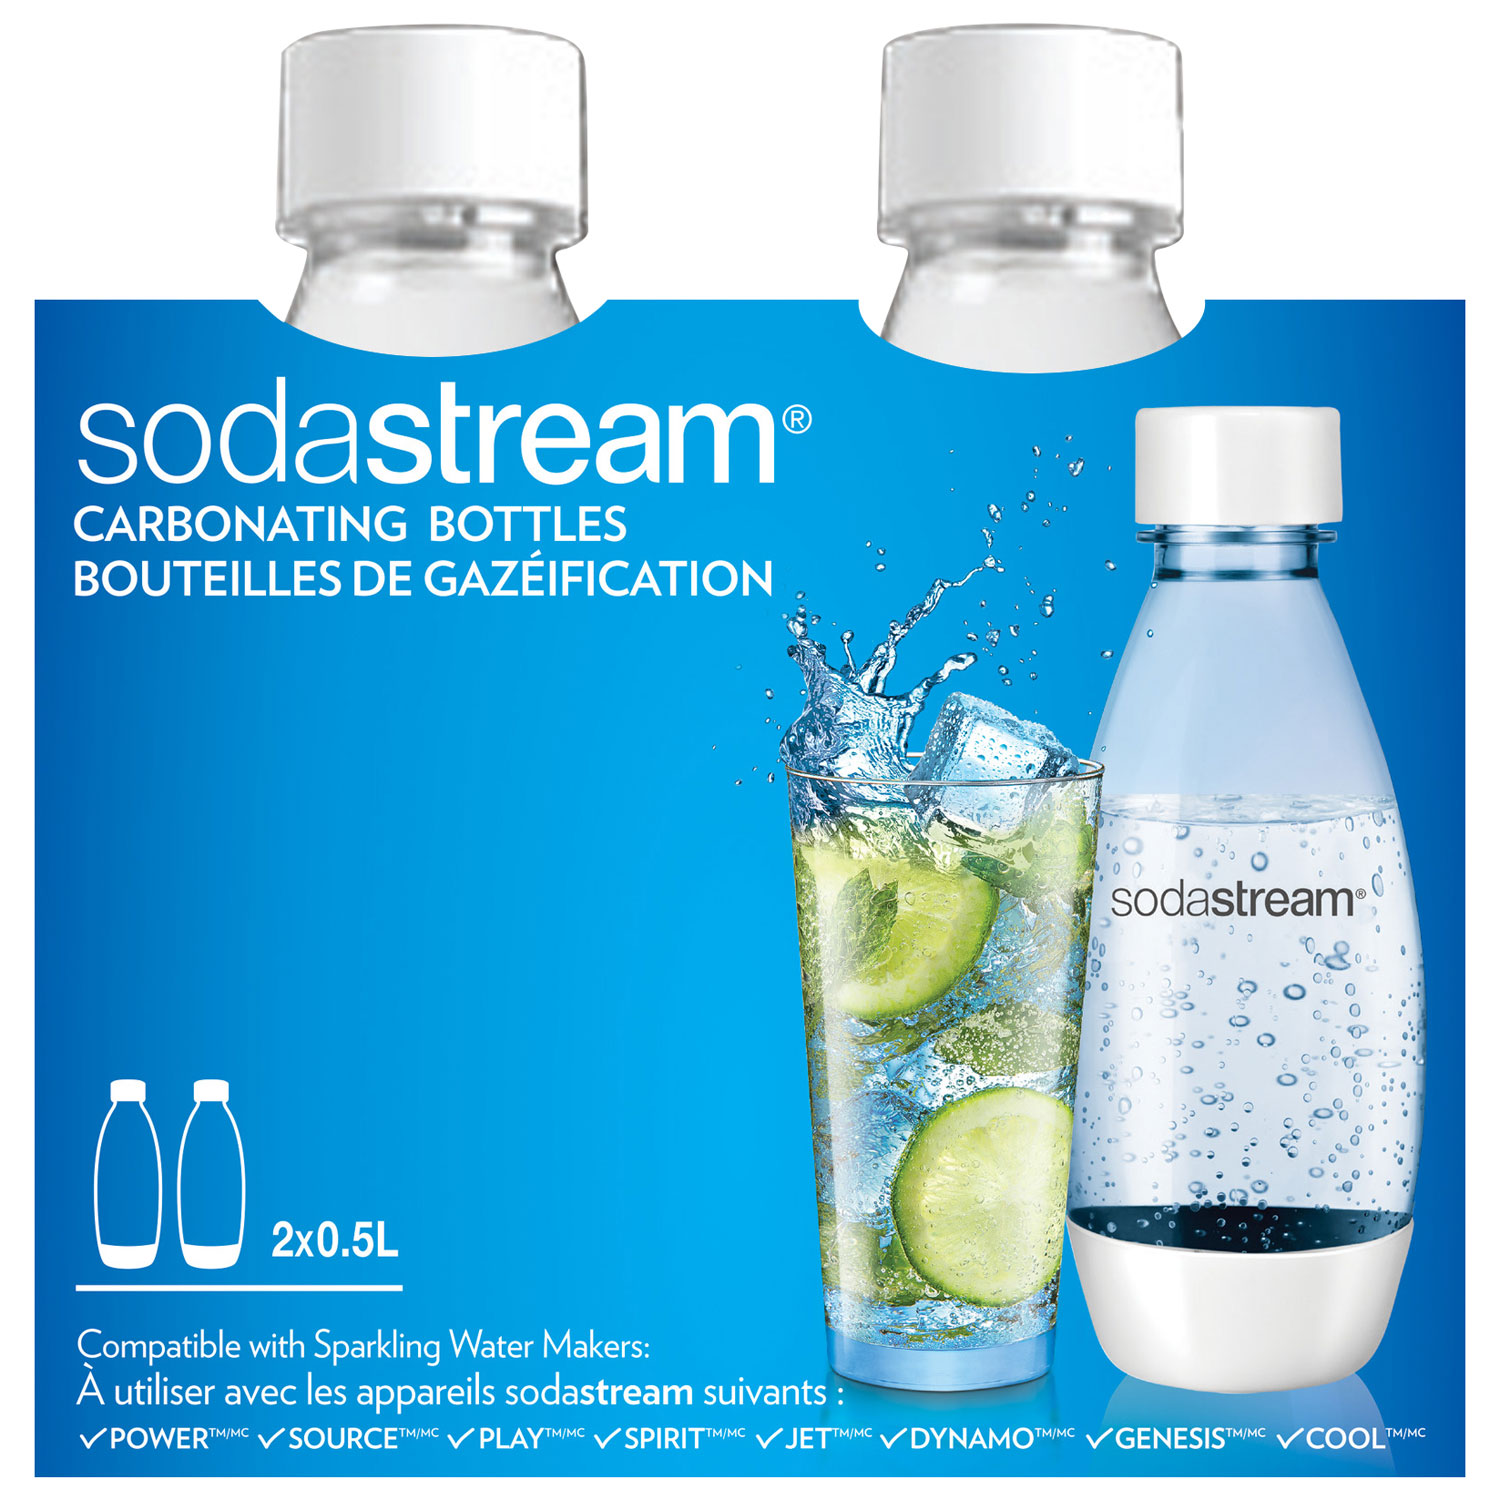 Sodastream accessories and bottles